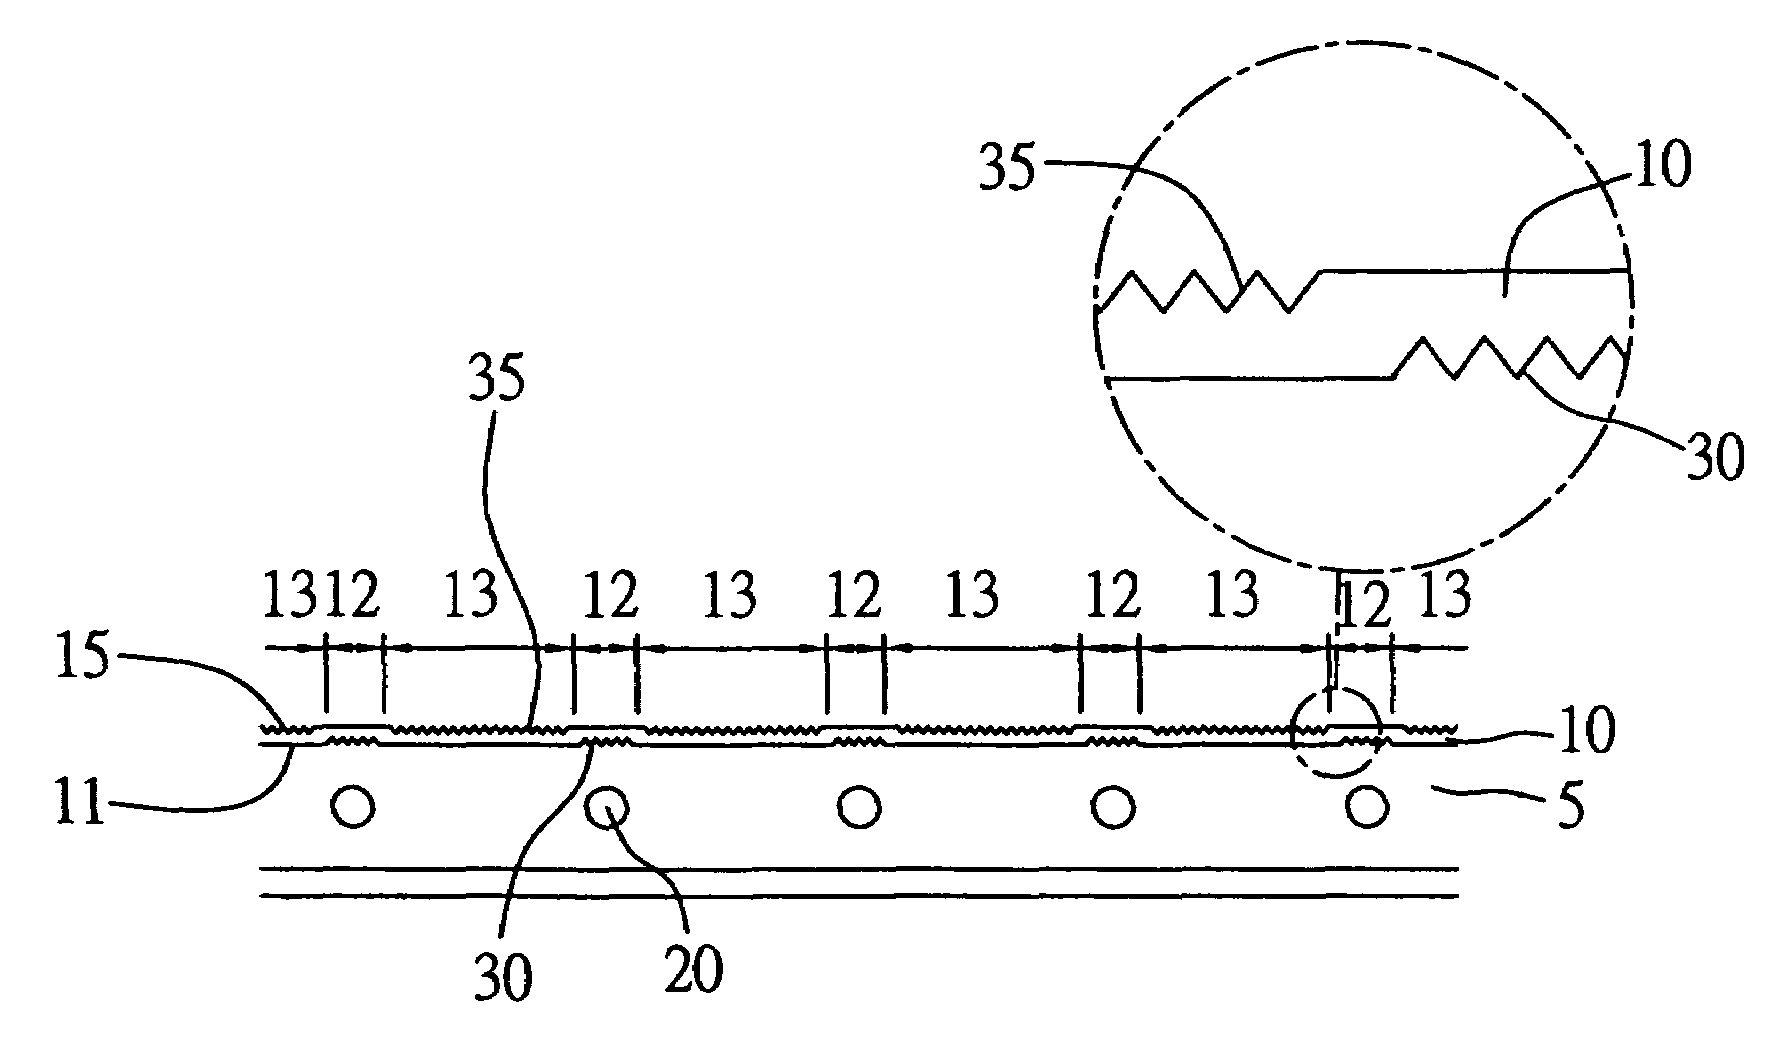 Apparatus for homogeneously distributing lights